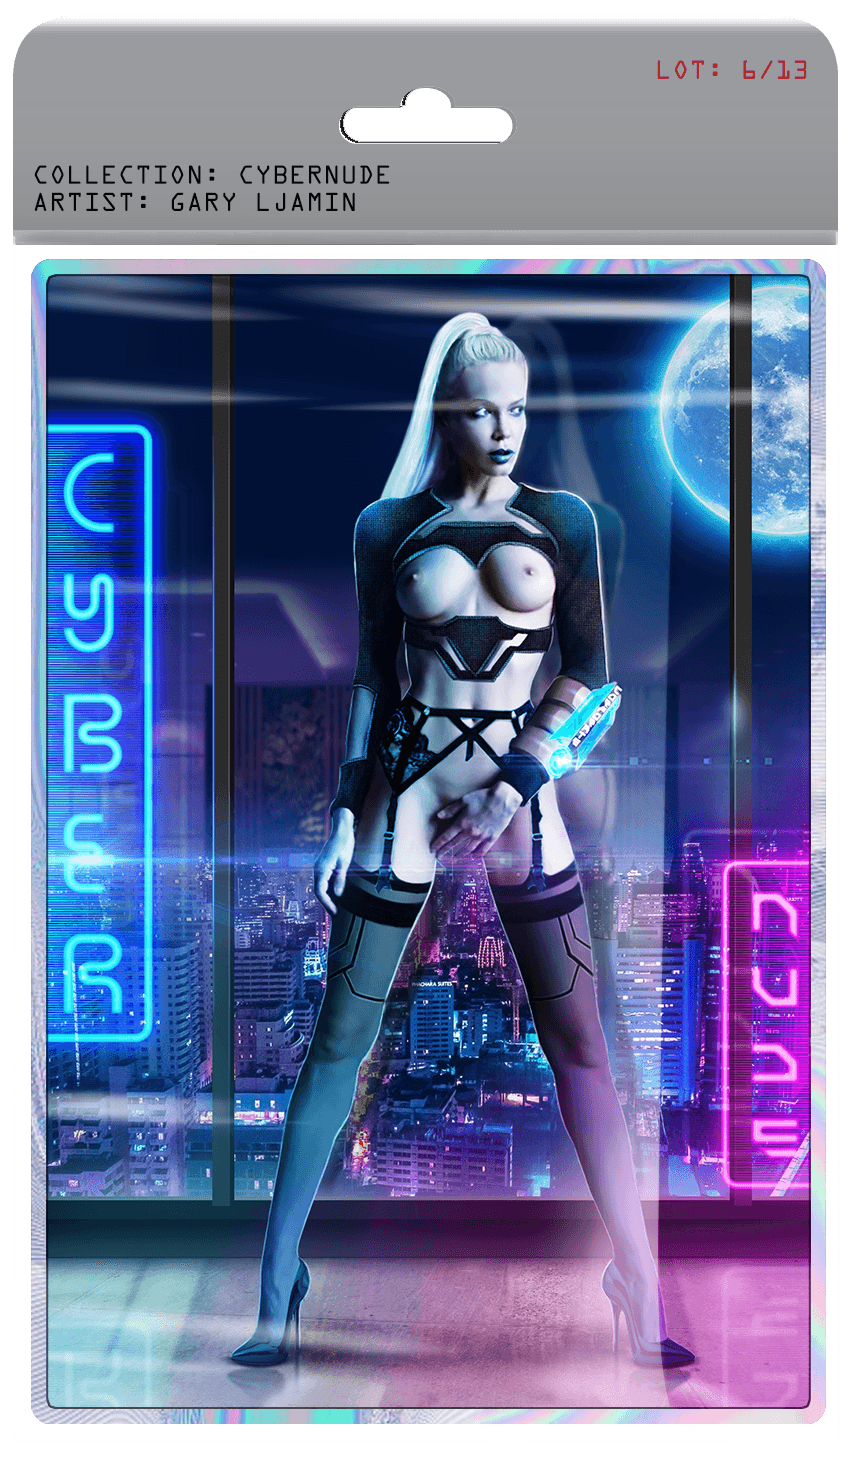 Cybernude playing cards - NFT token - 6 out of 13